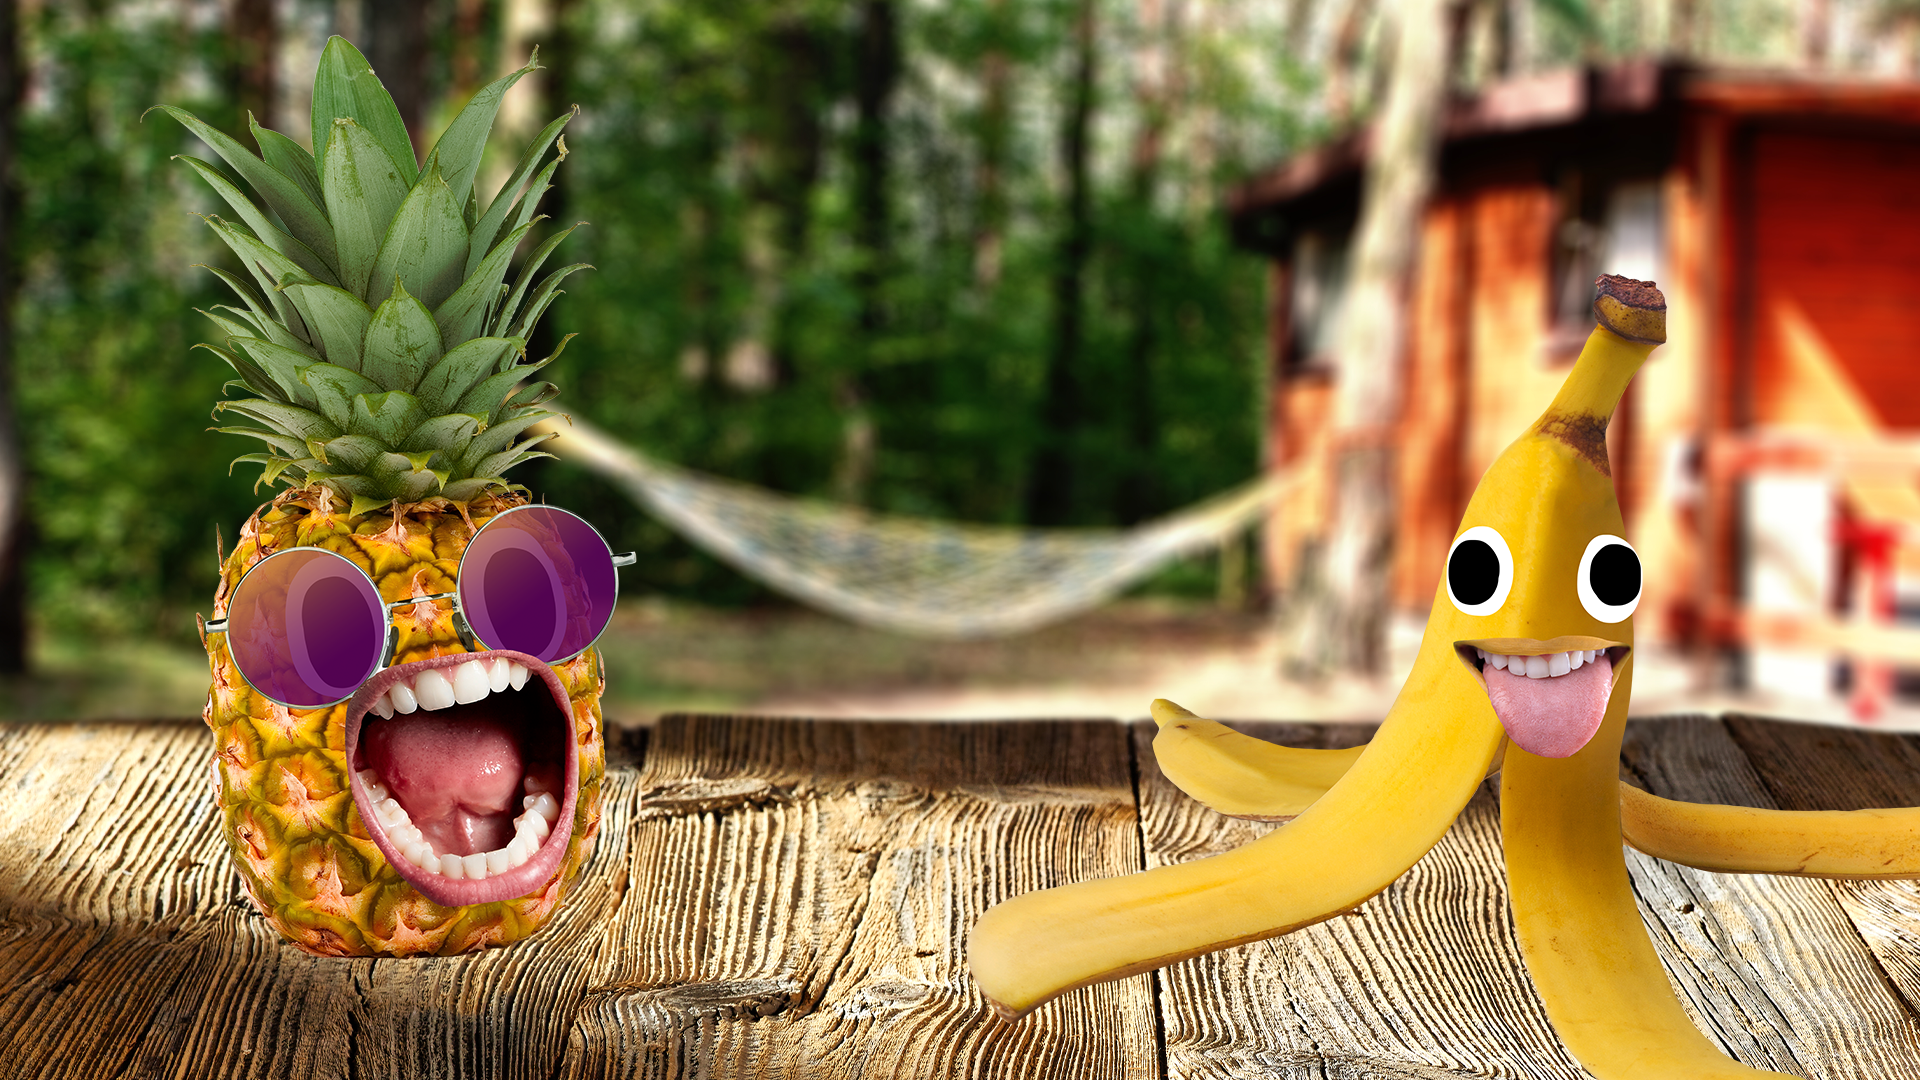 Summer camp with pineapple and banana